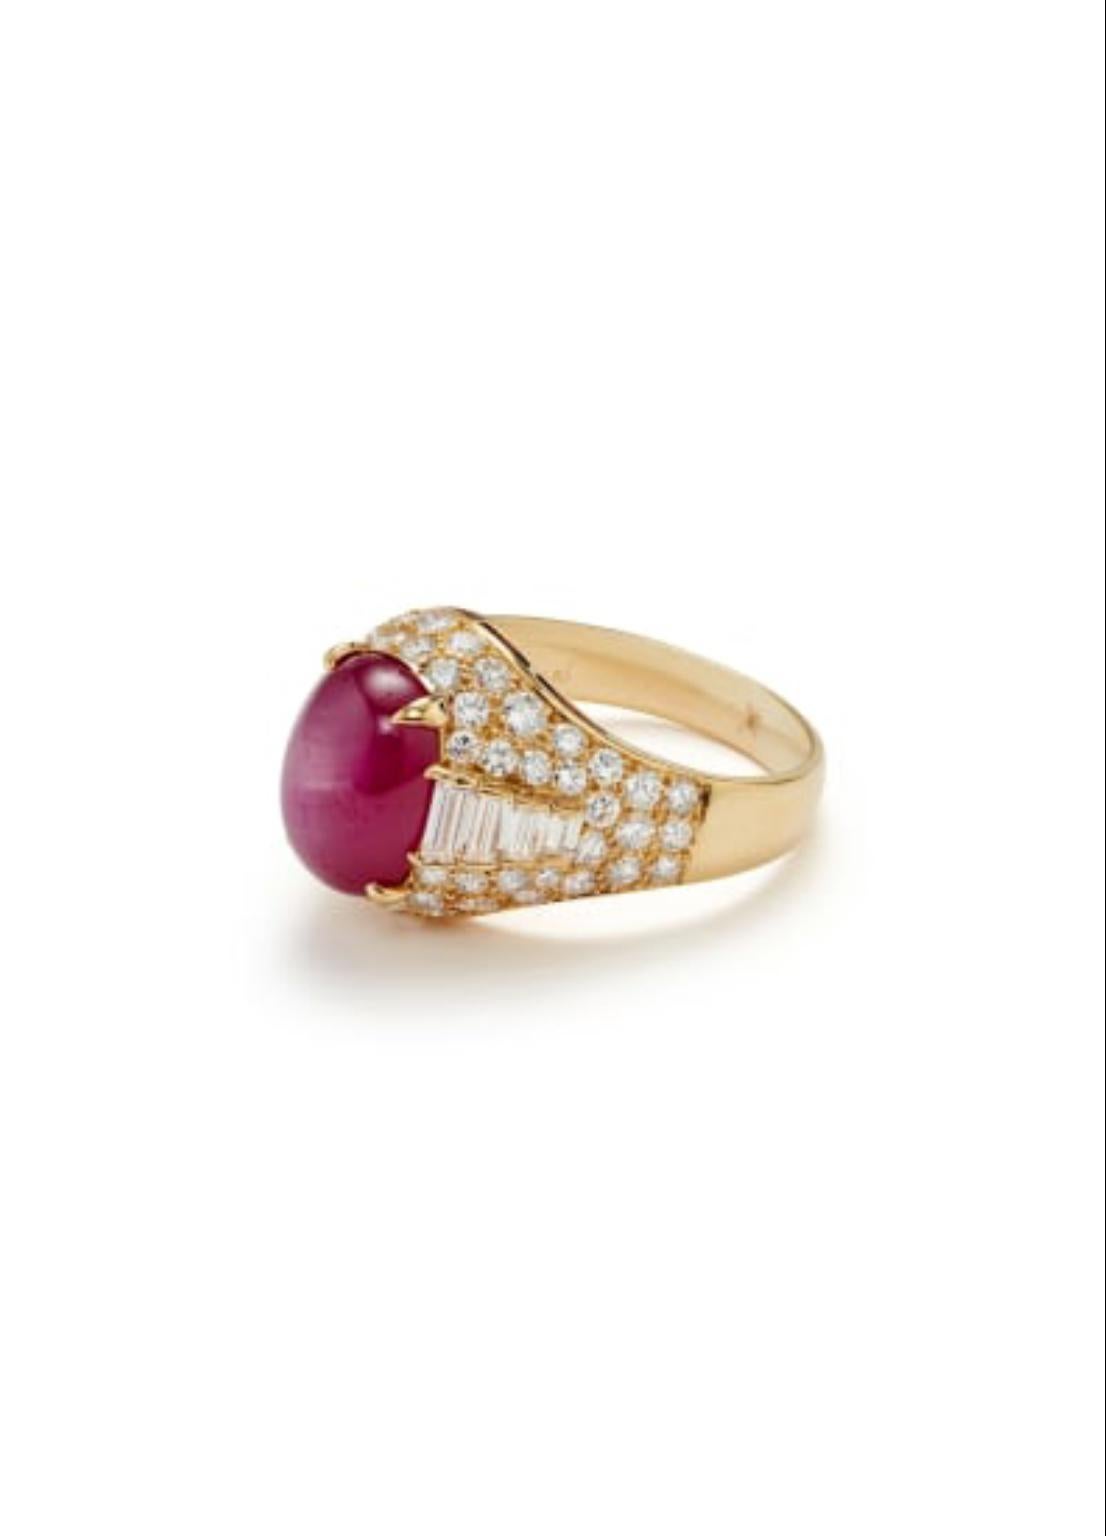 A beautiful Bulgari ‘Trombino’ Ring centering a no-heat cabochon Burma star ruby of approximately 8 carats, surrounded by baguette- and round brilliant-cut diamonds mounted in 18 karat yellow gold. Size 9.75, can be resized.
Accompanied by a GIA